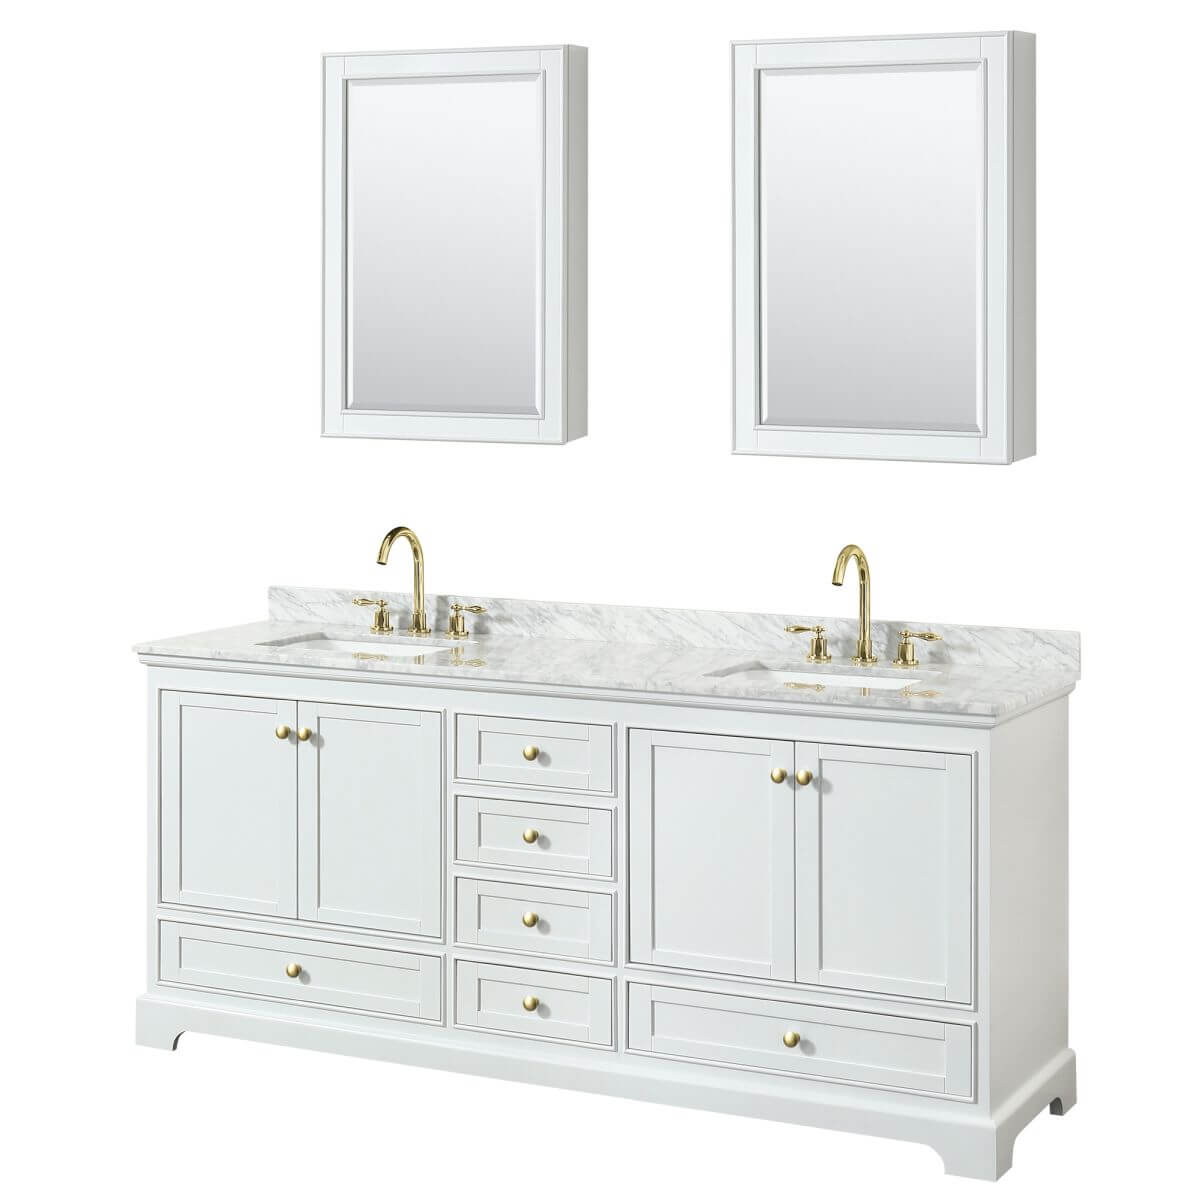 Wyndham Collection Deborah 80 inch Double Bathroom Vanity in White with White Carrara Marble Countertop, Undermount Square Sinks, Brushed Gold Trim and Medicine Cabinets - WCS202080DWGCMUNSMED